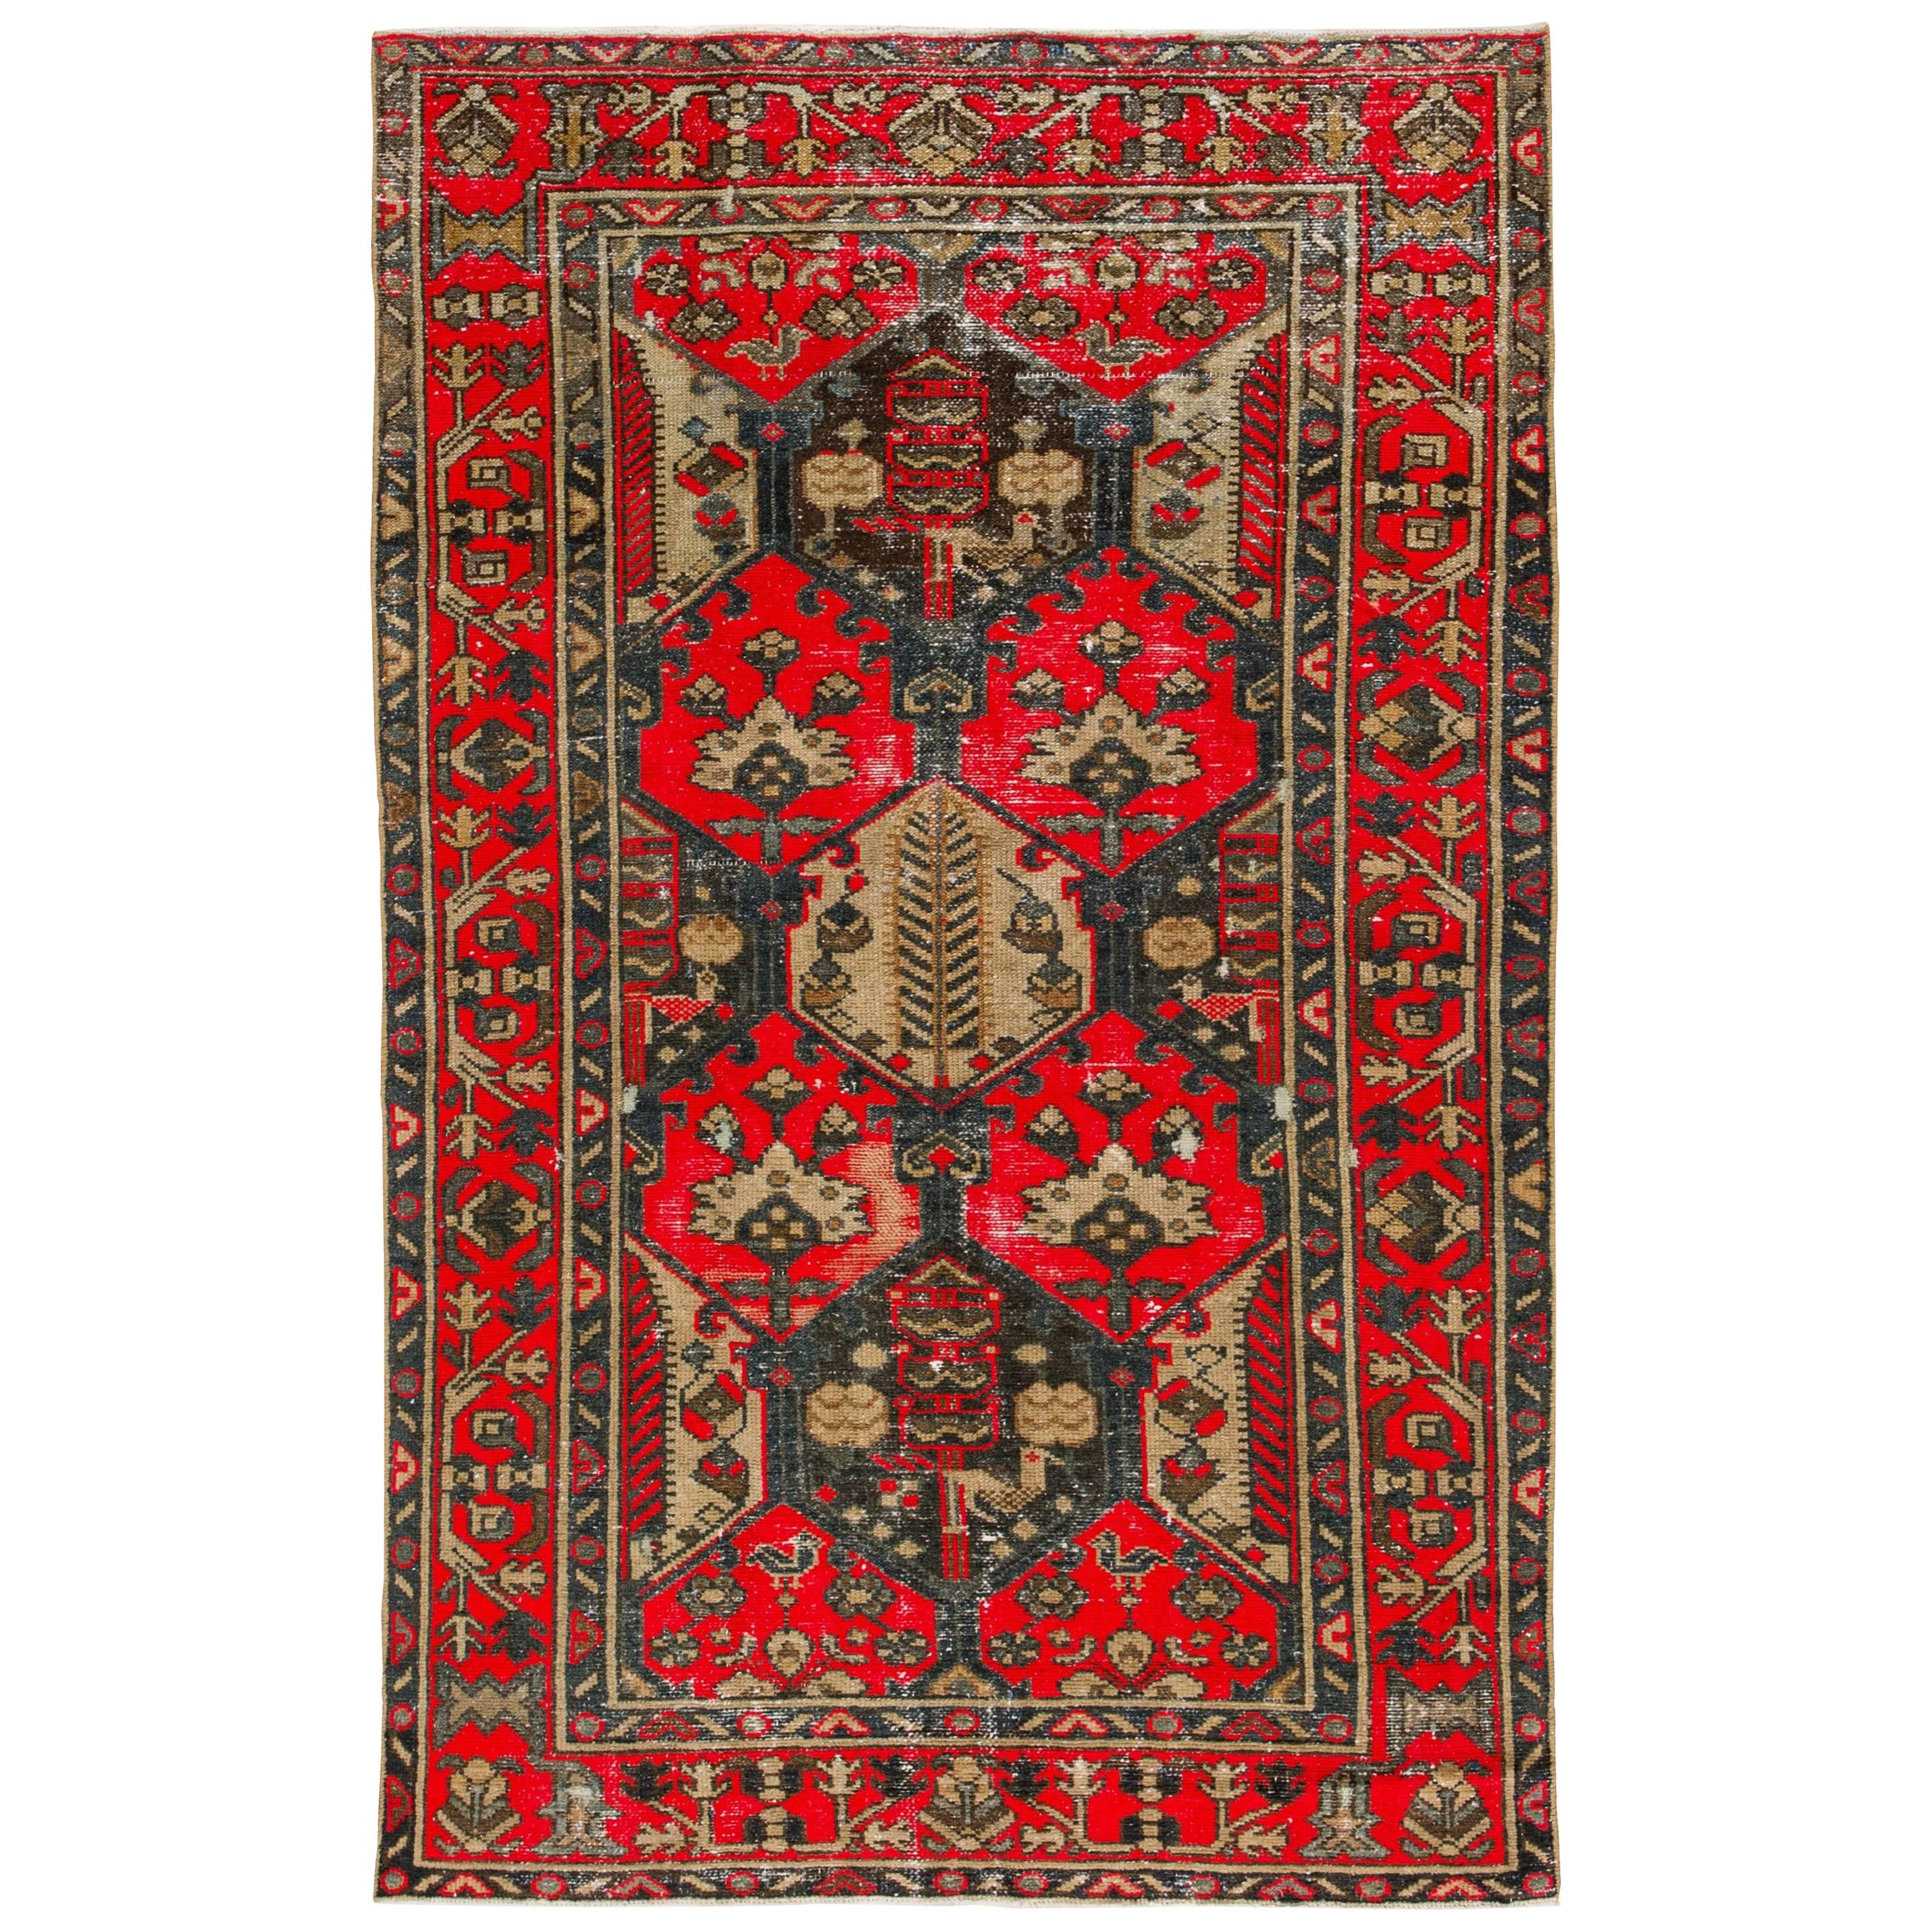 Vintage Distressed Red and Brown Persian Tabriz Carpet